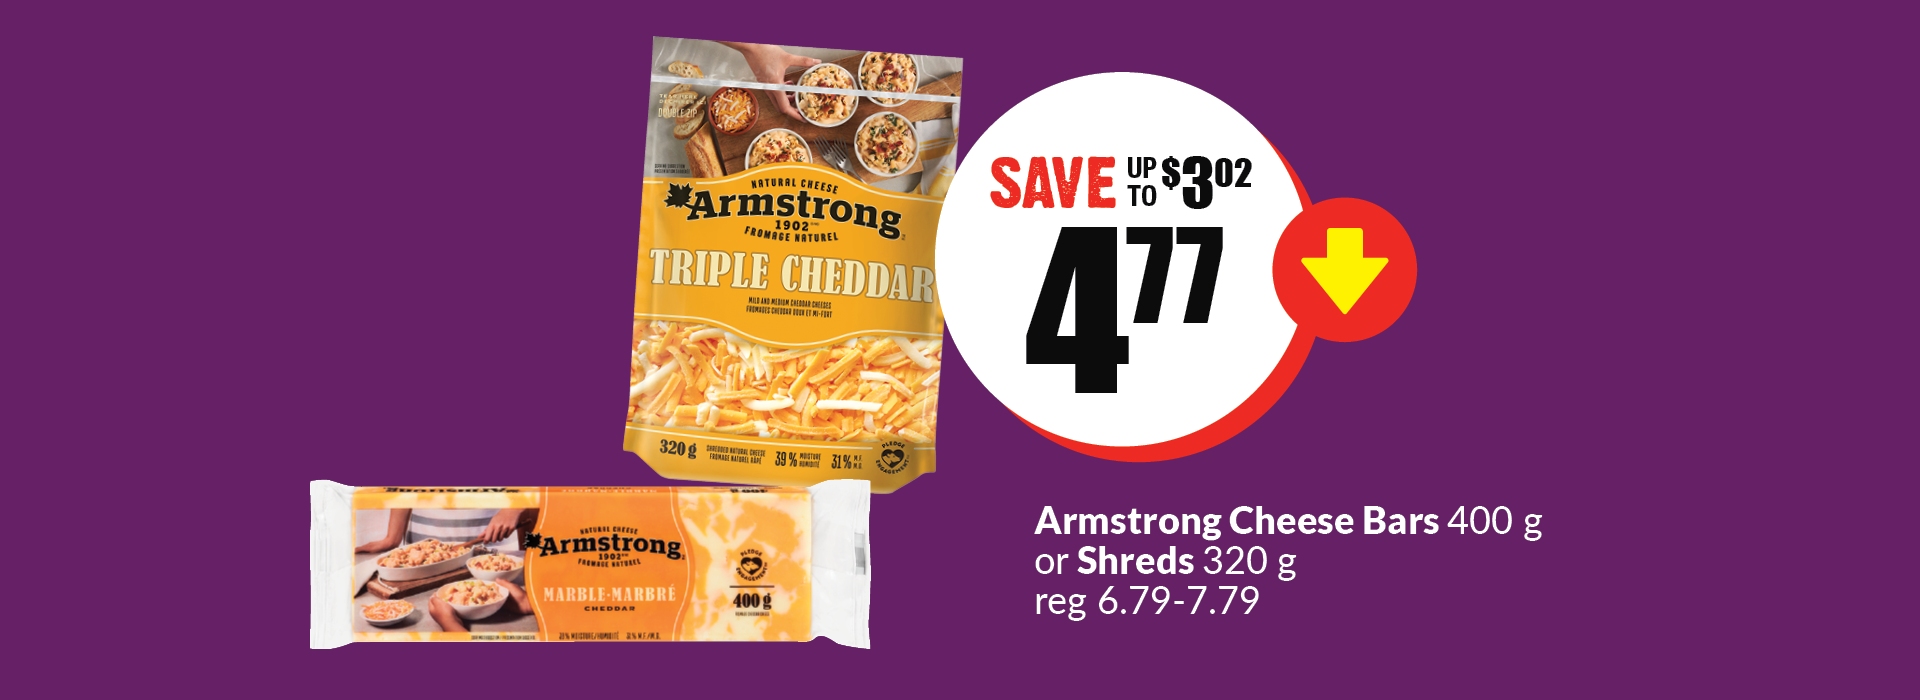 The following image contains the text, "Armstrong cheese Bars 400g or shreds 320g reg 6.79- 7.79. Get them at just 4.77 and save up to $3.02."